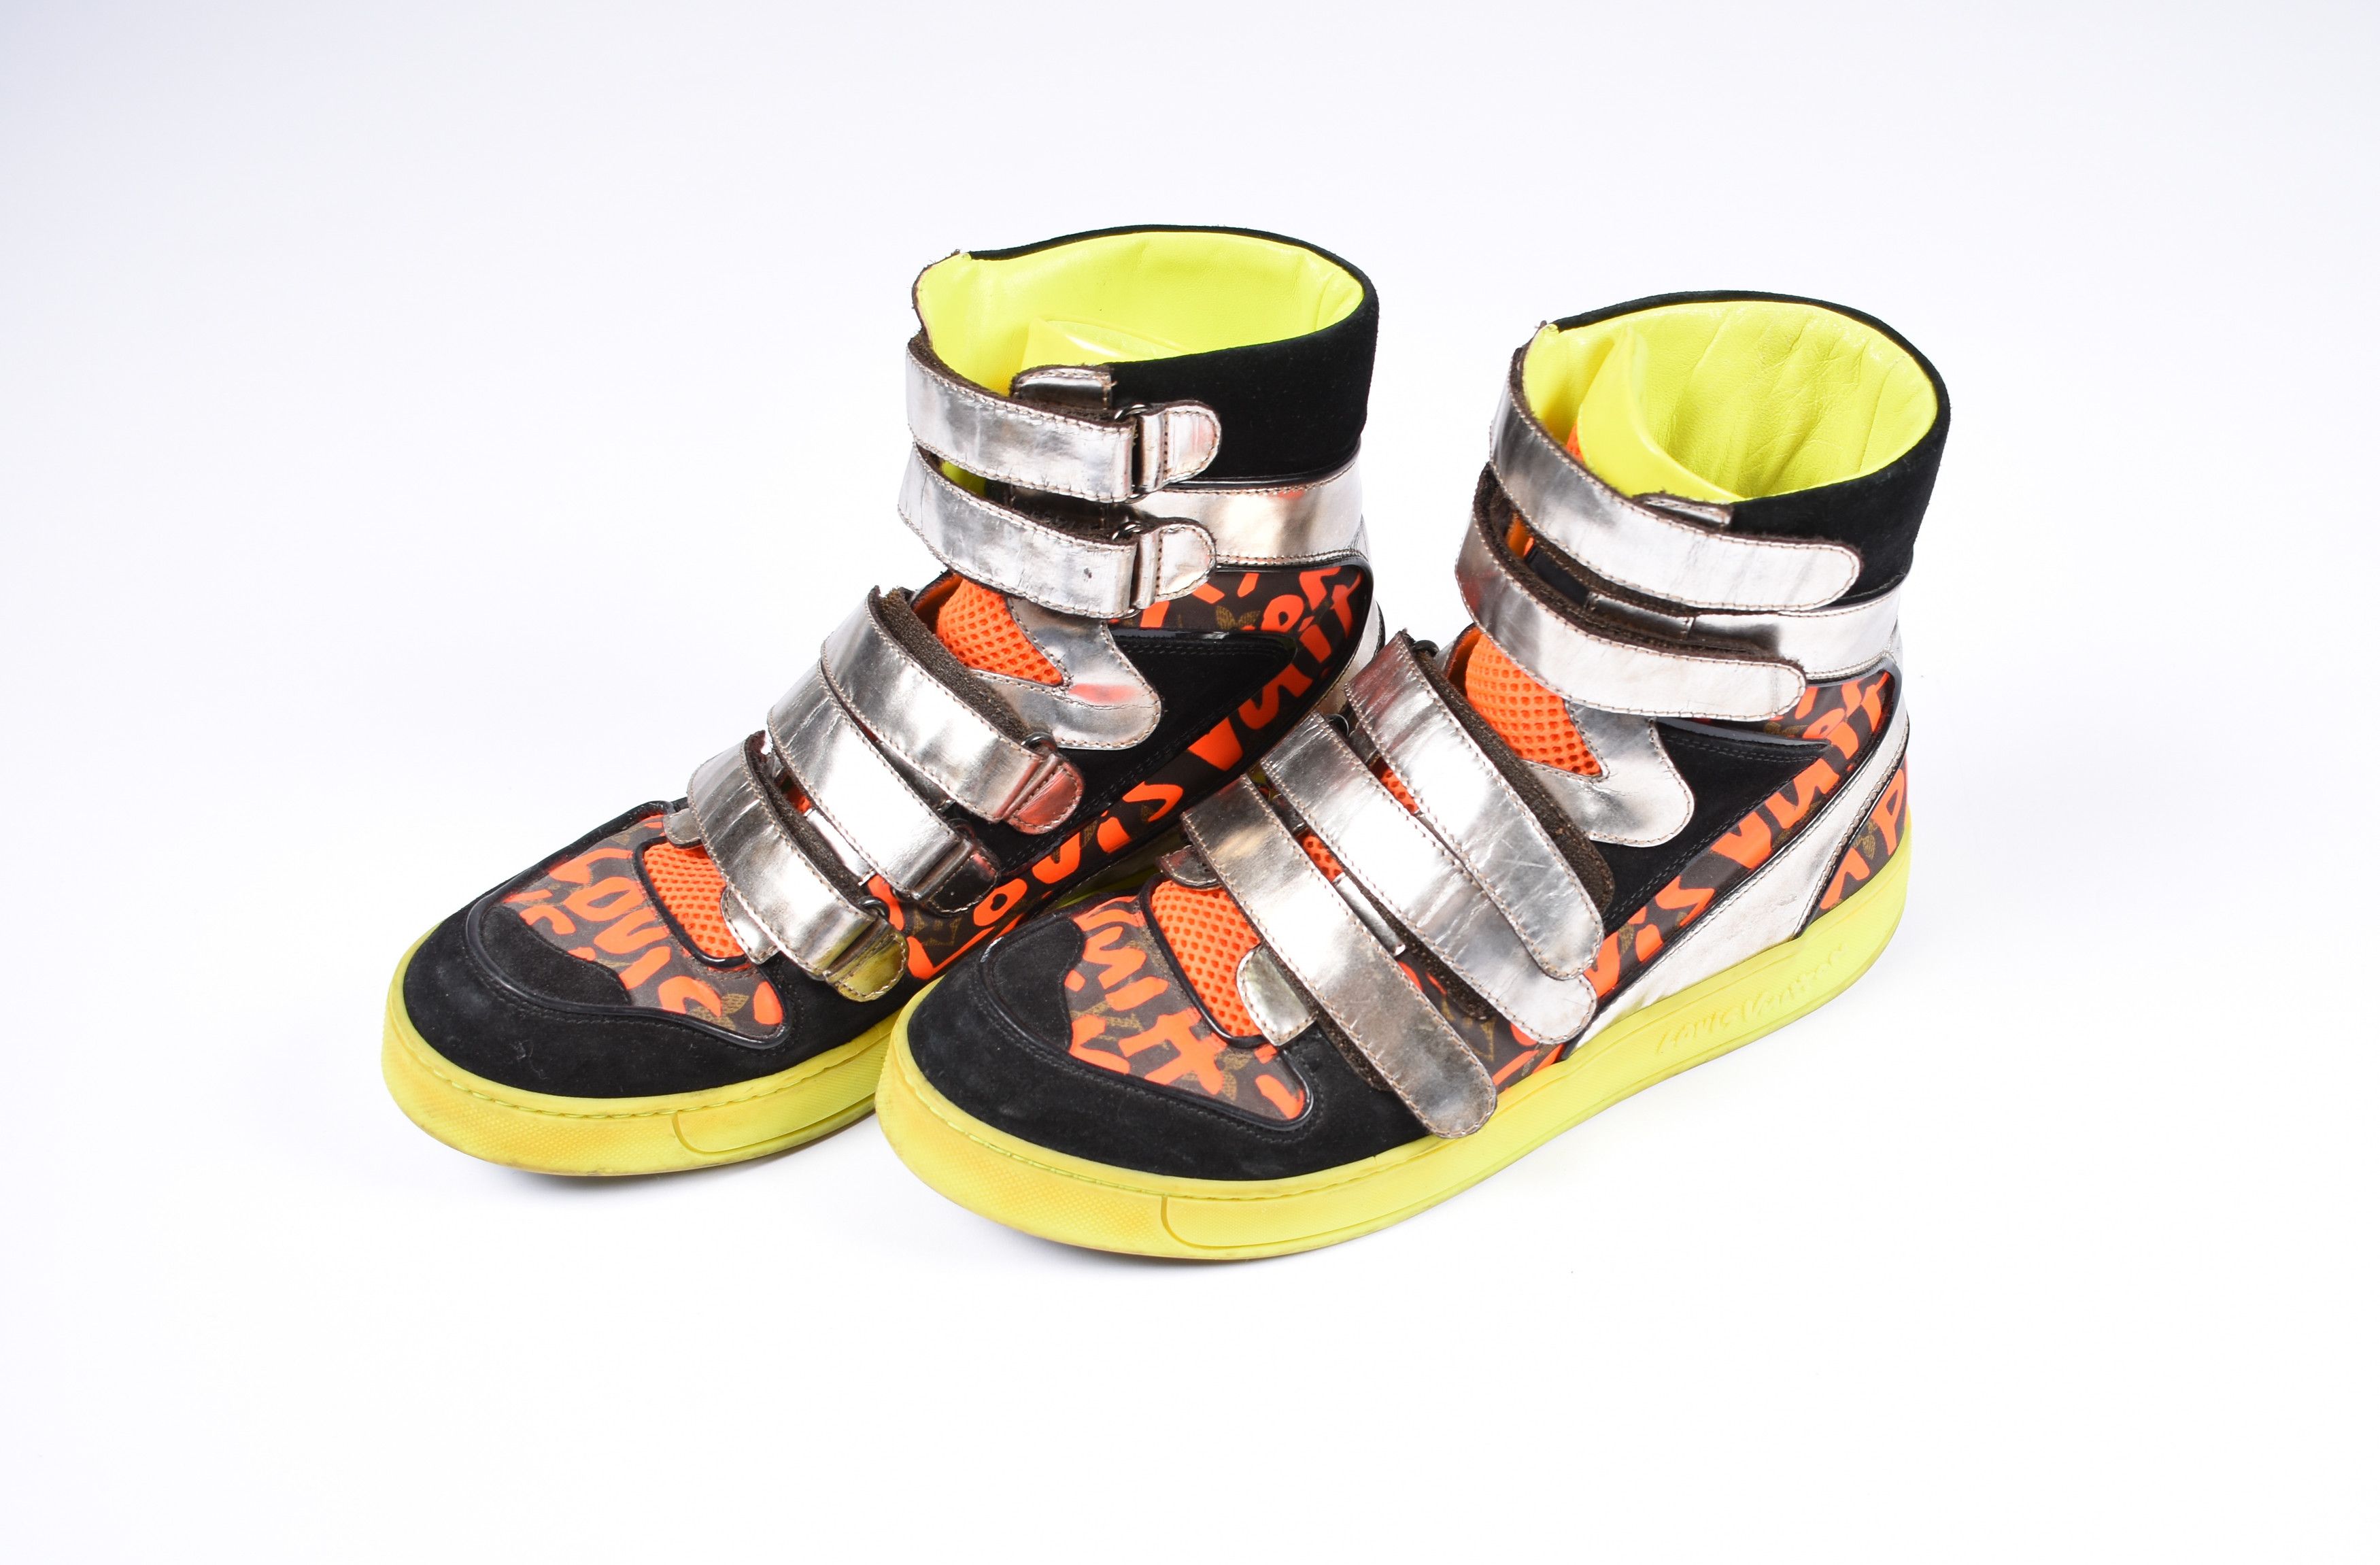 Louis Vuitton Stephen Sprouse GRAFFITI SNEAKERS High top Size 10.5 US  Spellout